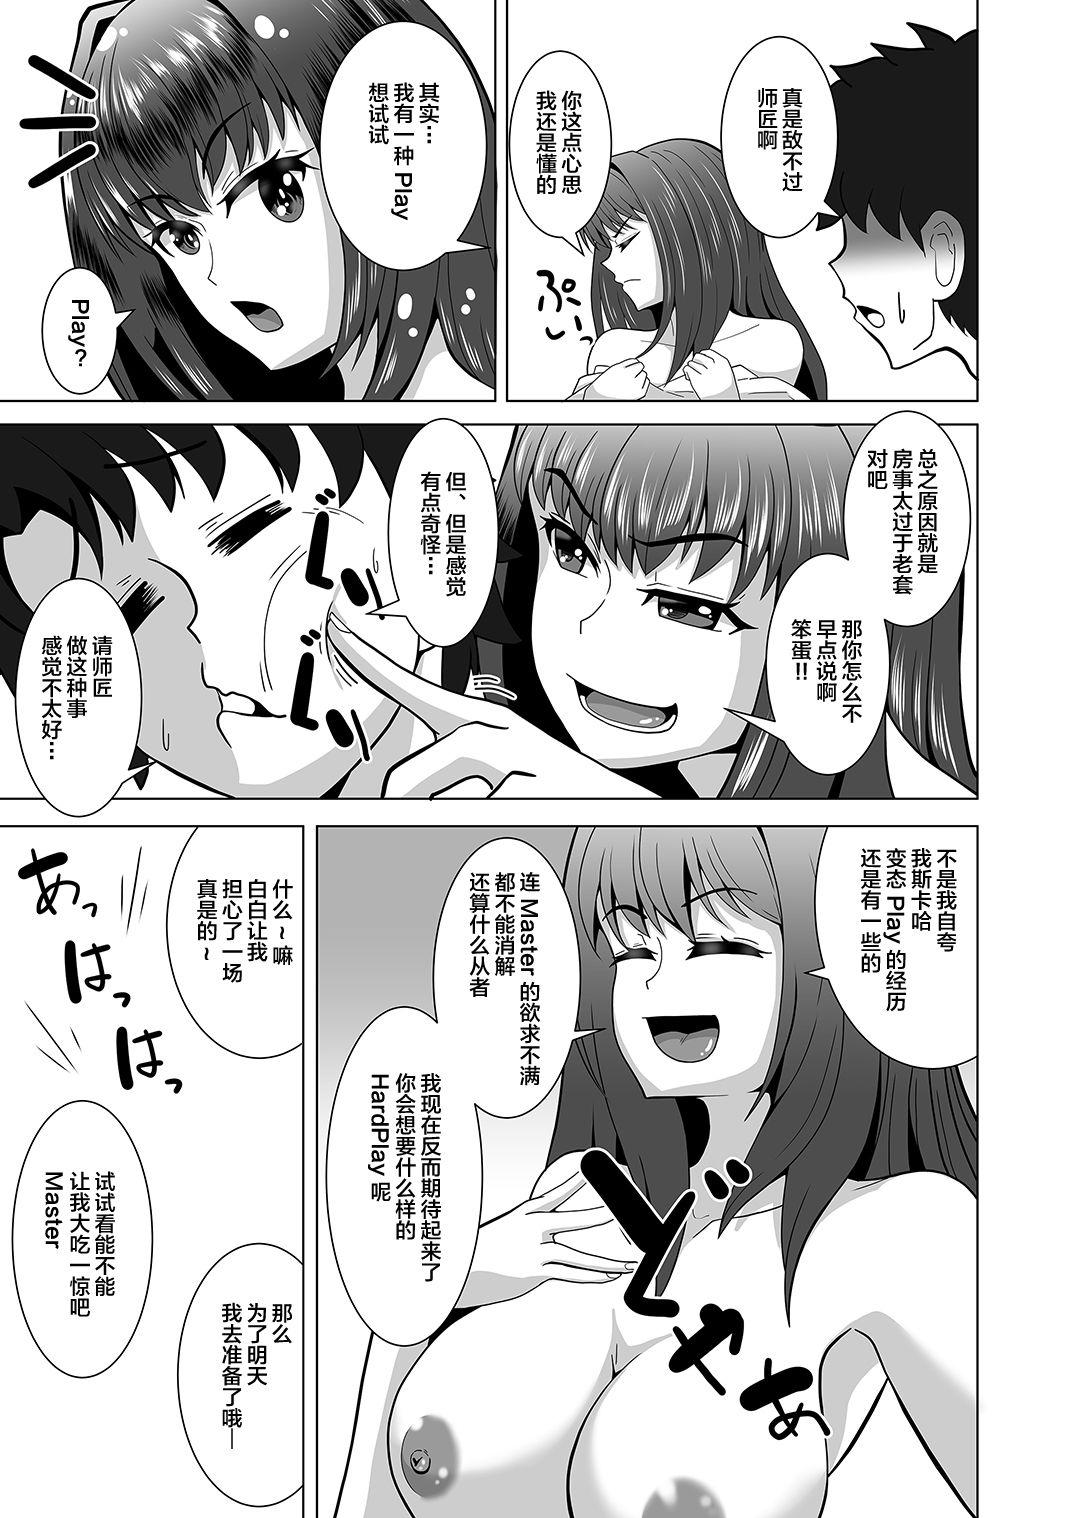 Scathach-chan to Issho 4